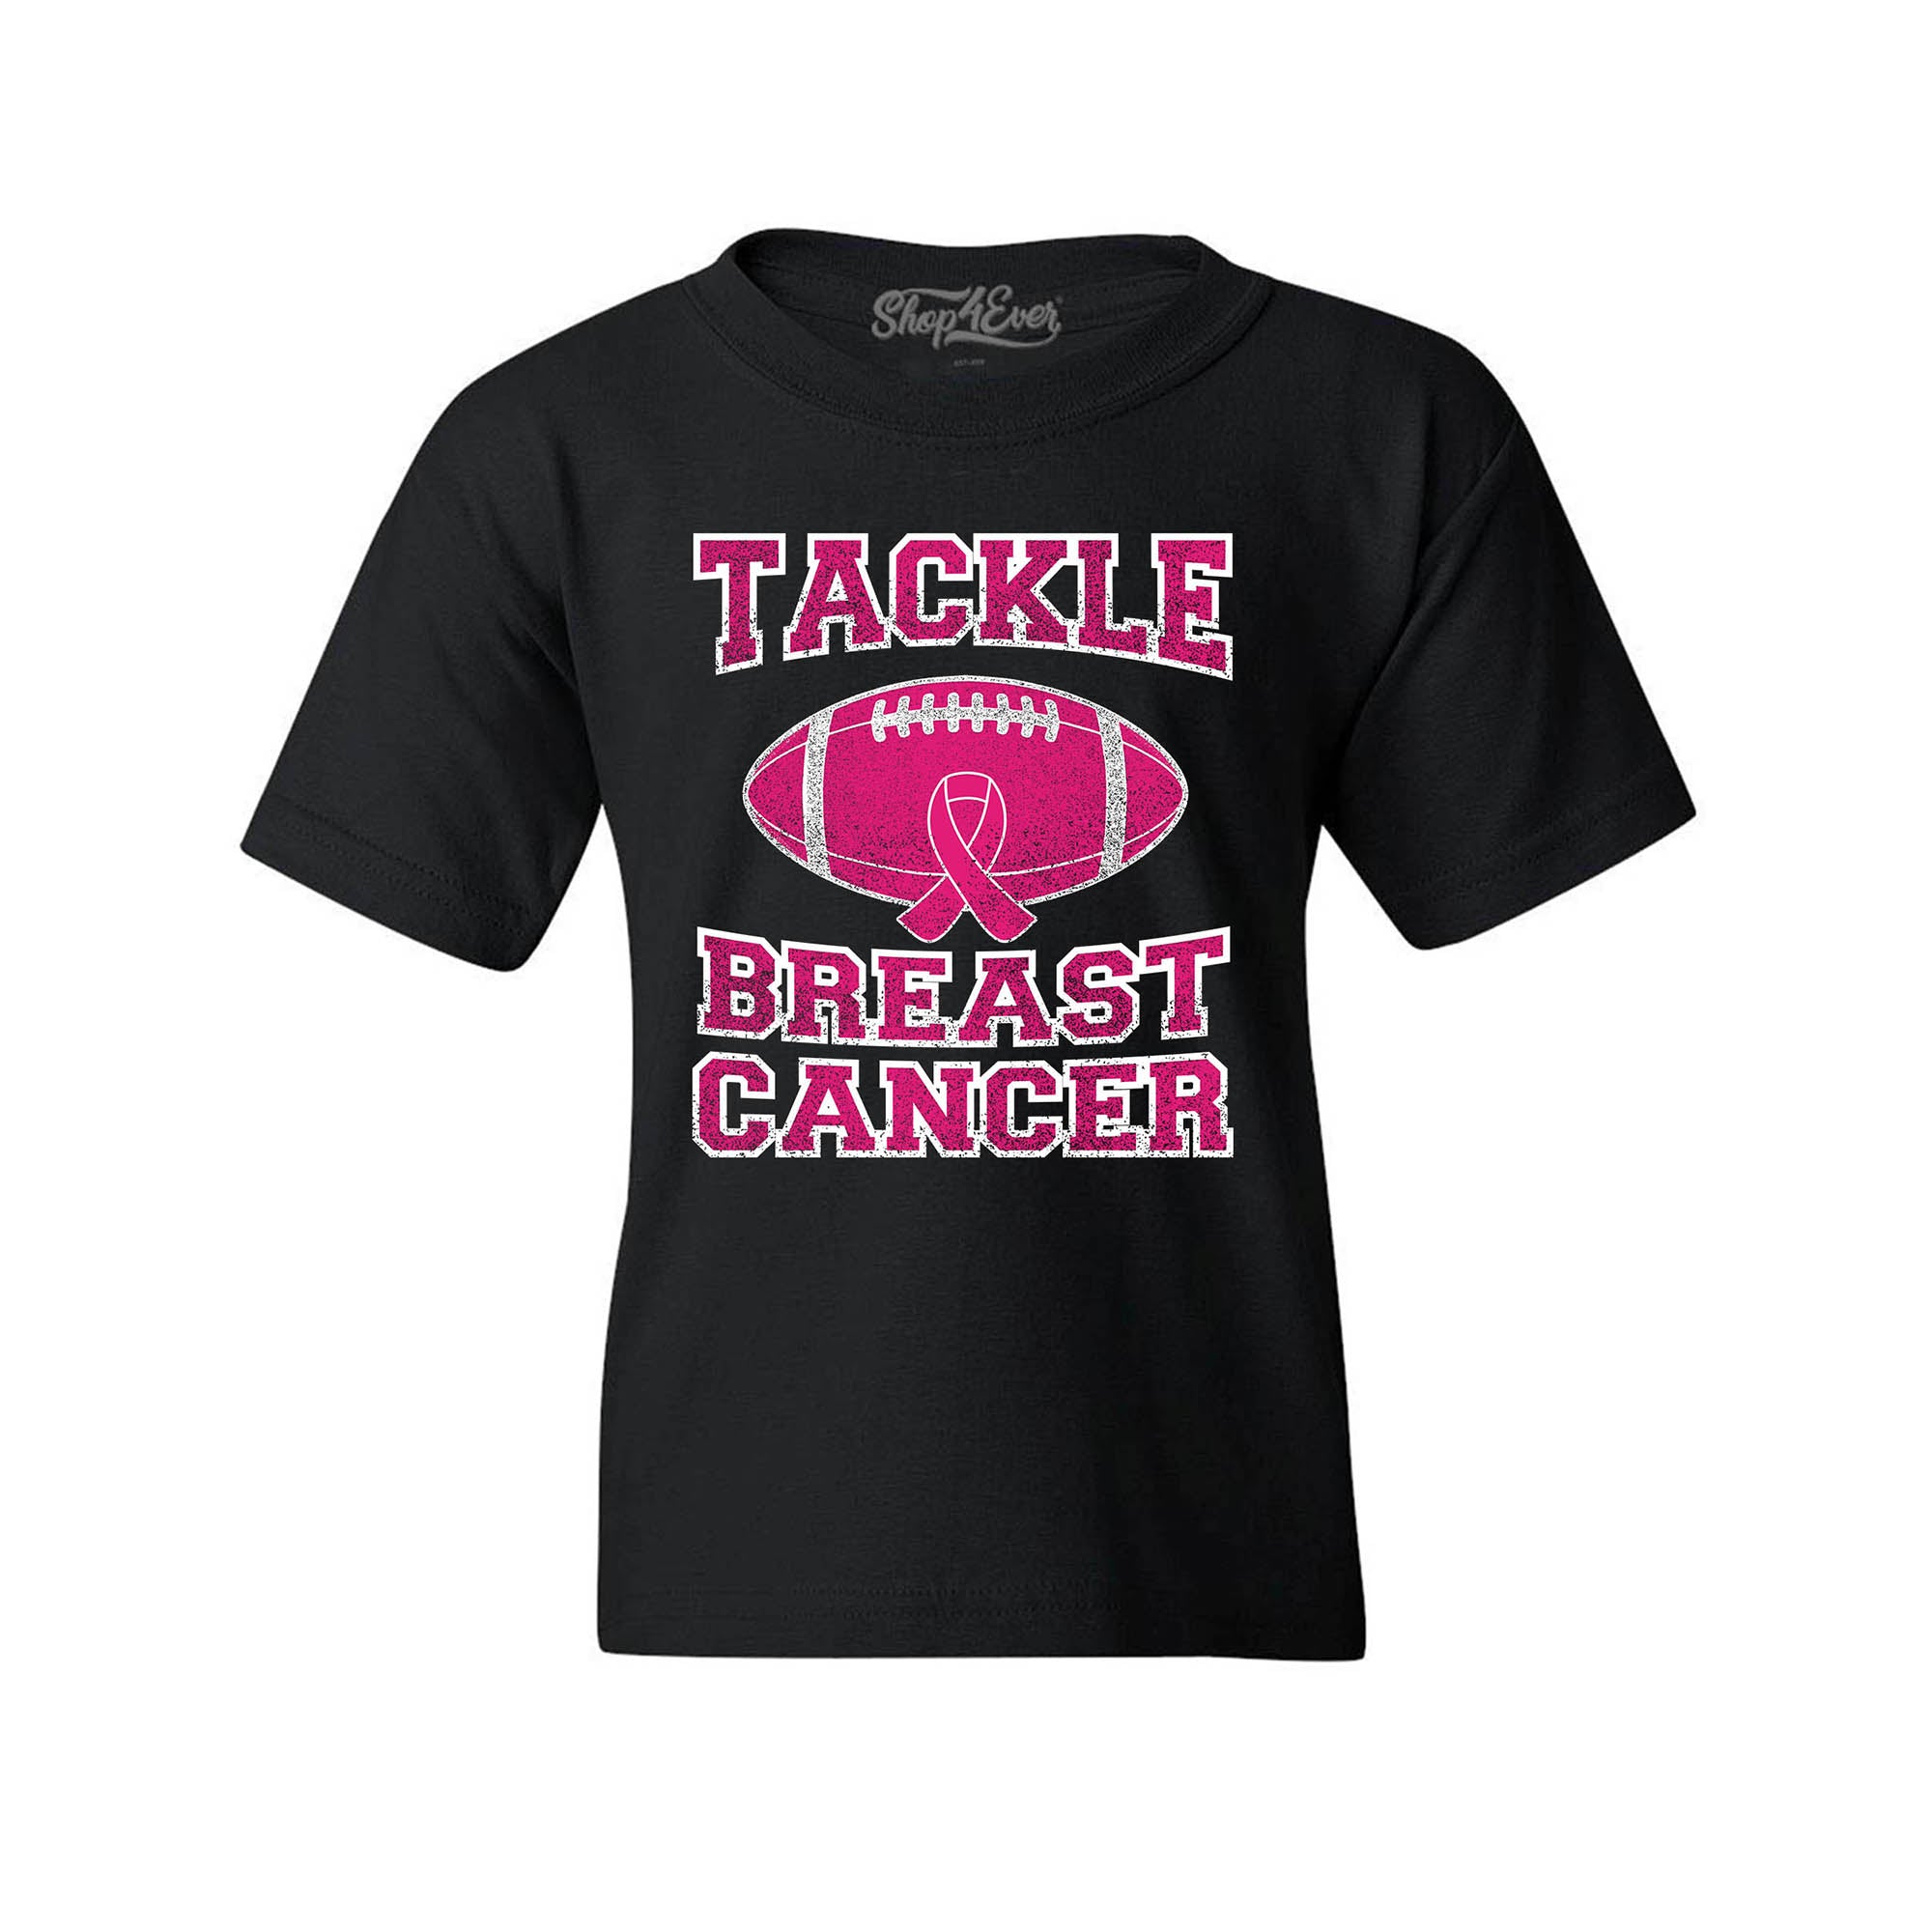 Tackle Breast Cancer Awareness Youth's T-Shirt Ribbon Support Child's Tee Shirts